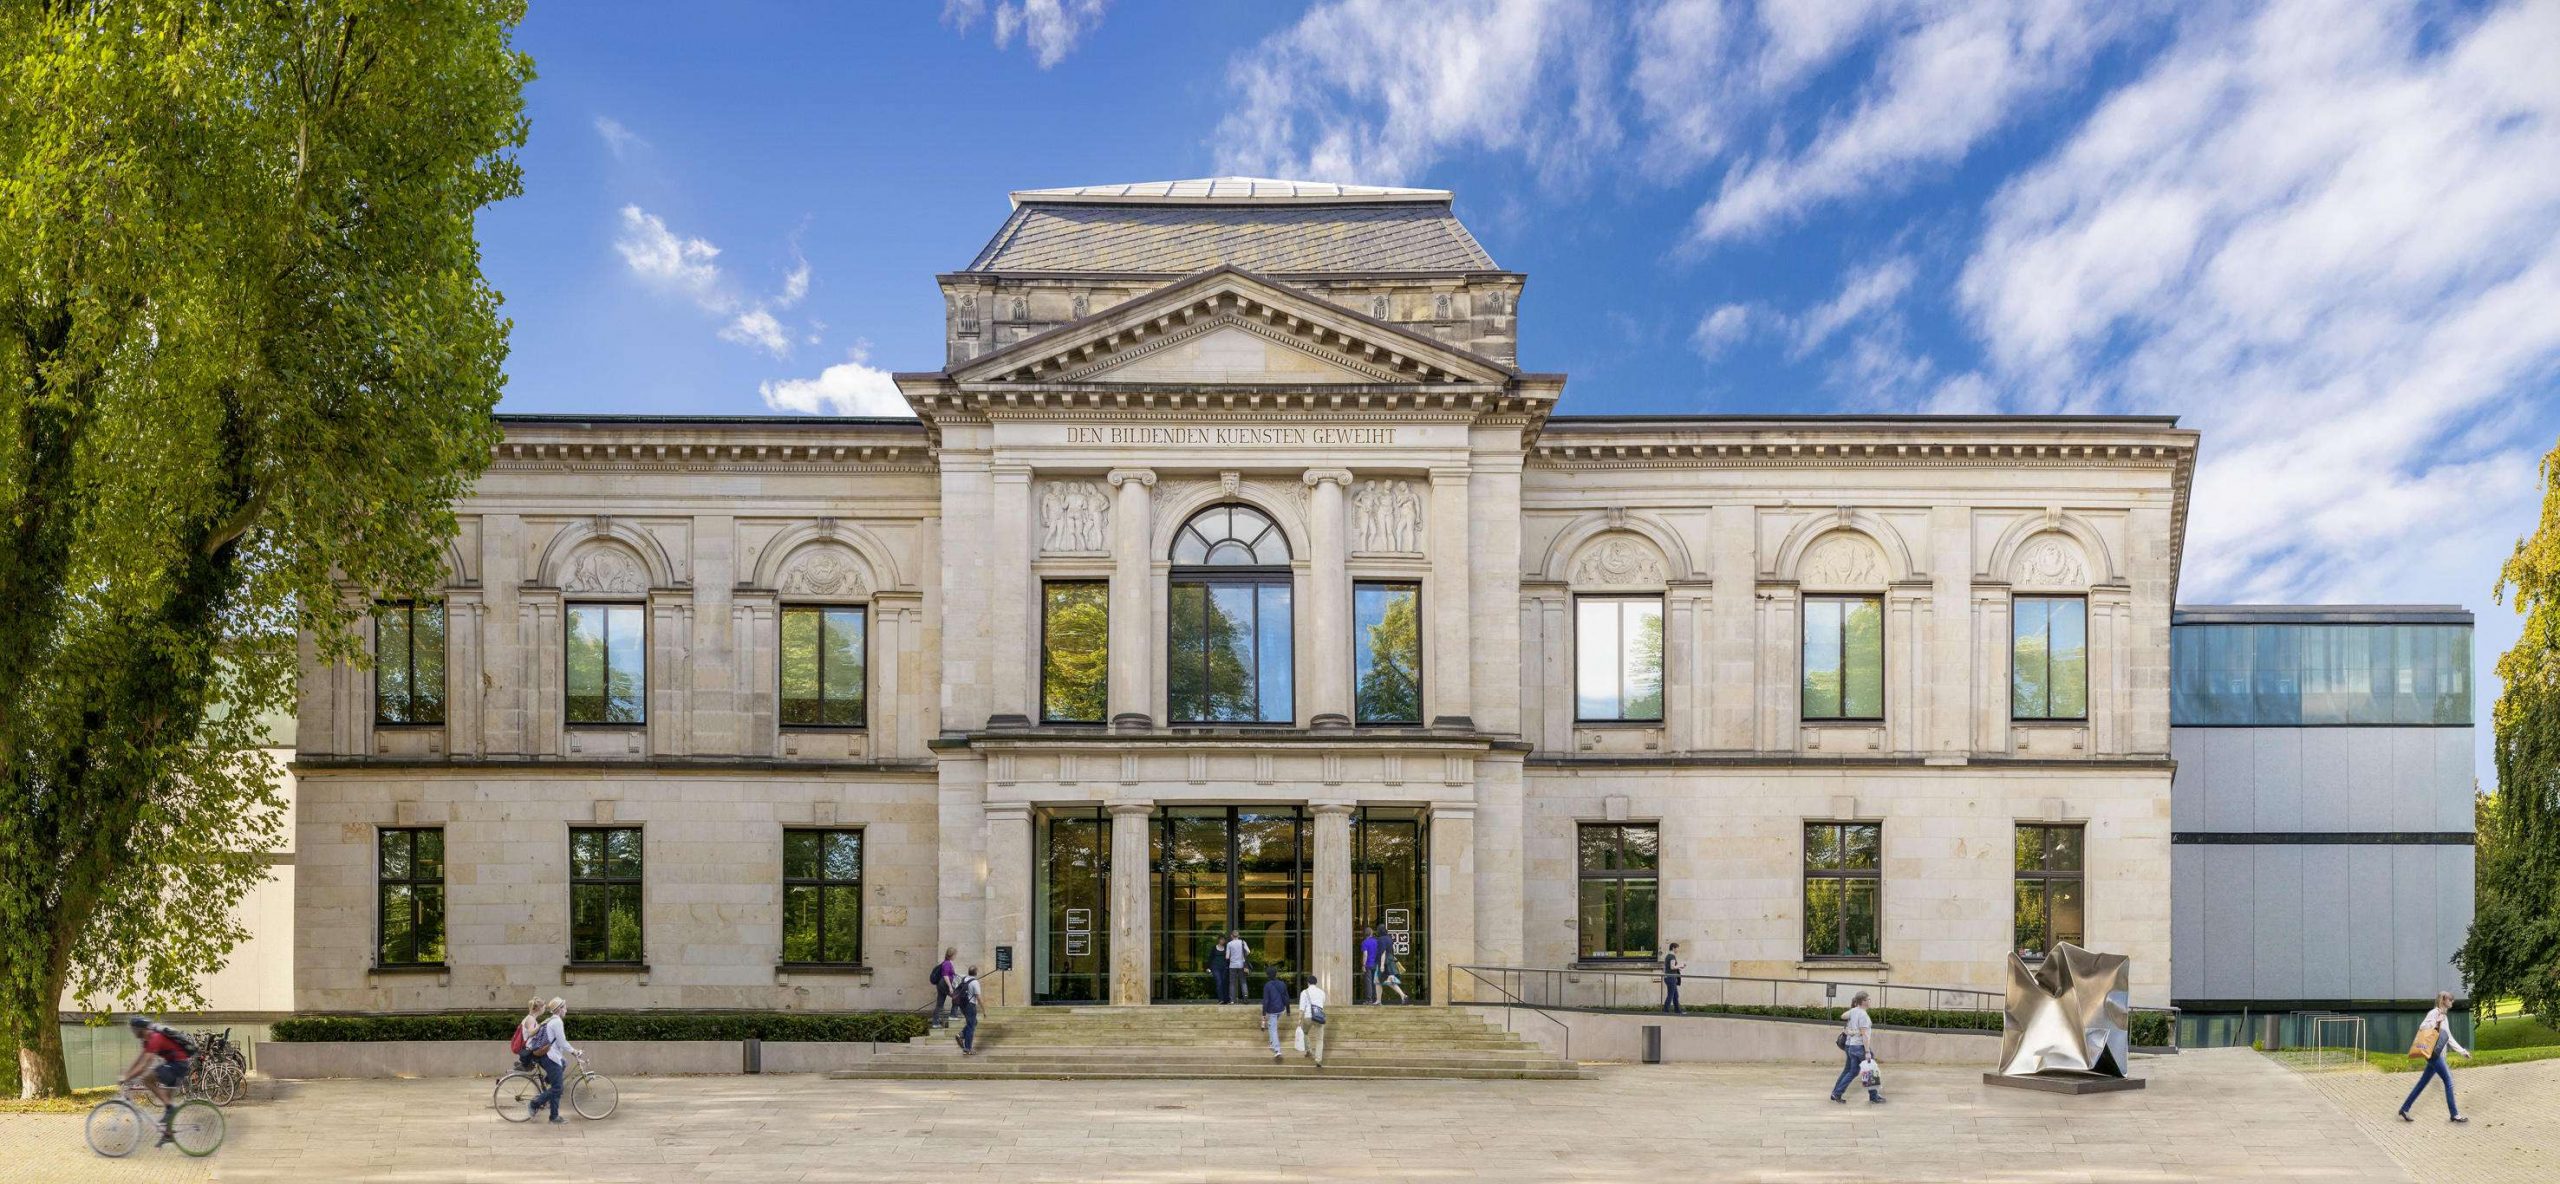 Kunsthalle Bremen Museum - 10 Attractions & Things to Do in Bremen